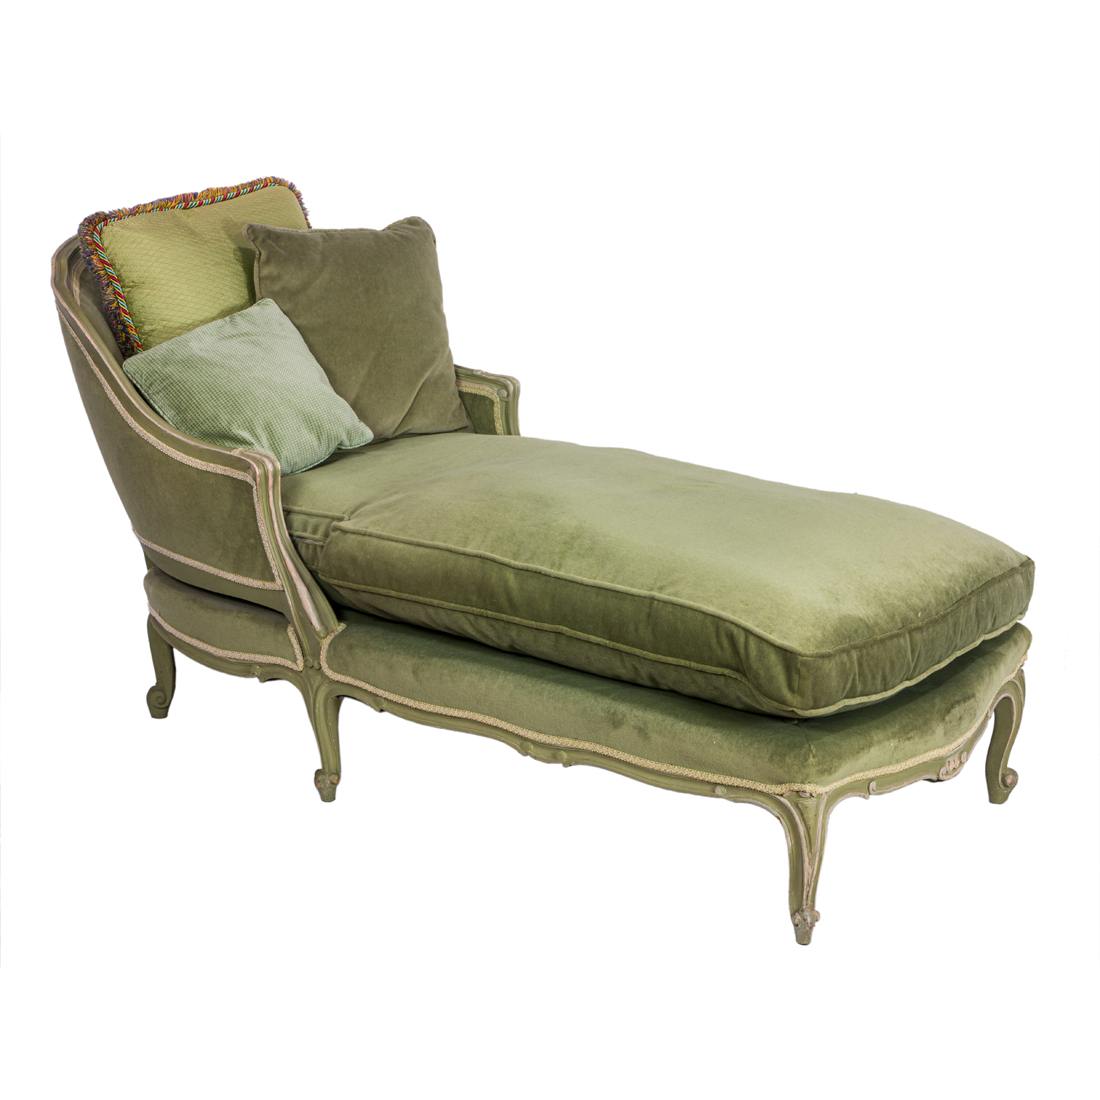 LOUIS XV STYLE PAINTED WOOD CHAISE 2d0f79